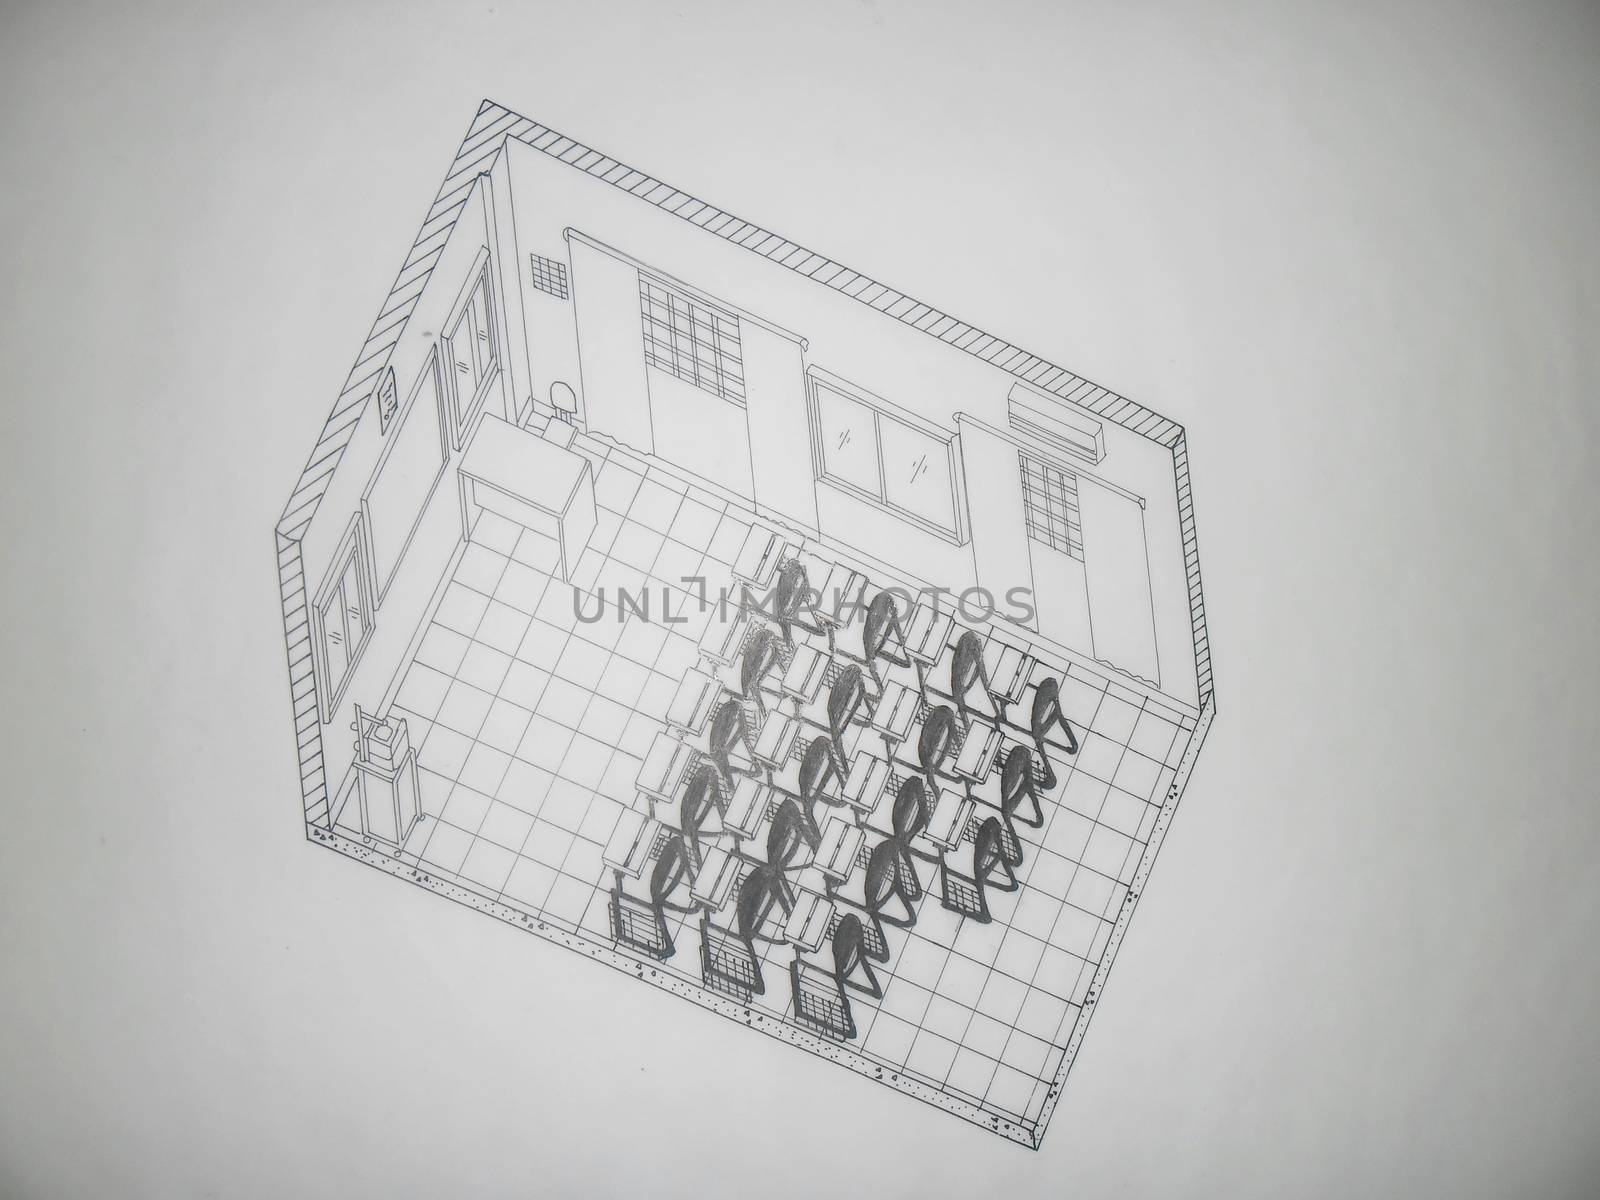 3D isometric view of a classroom with drafting tables